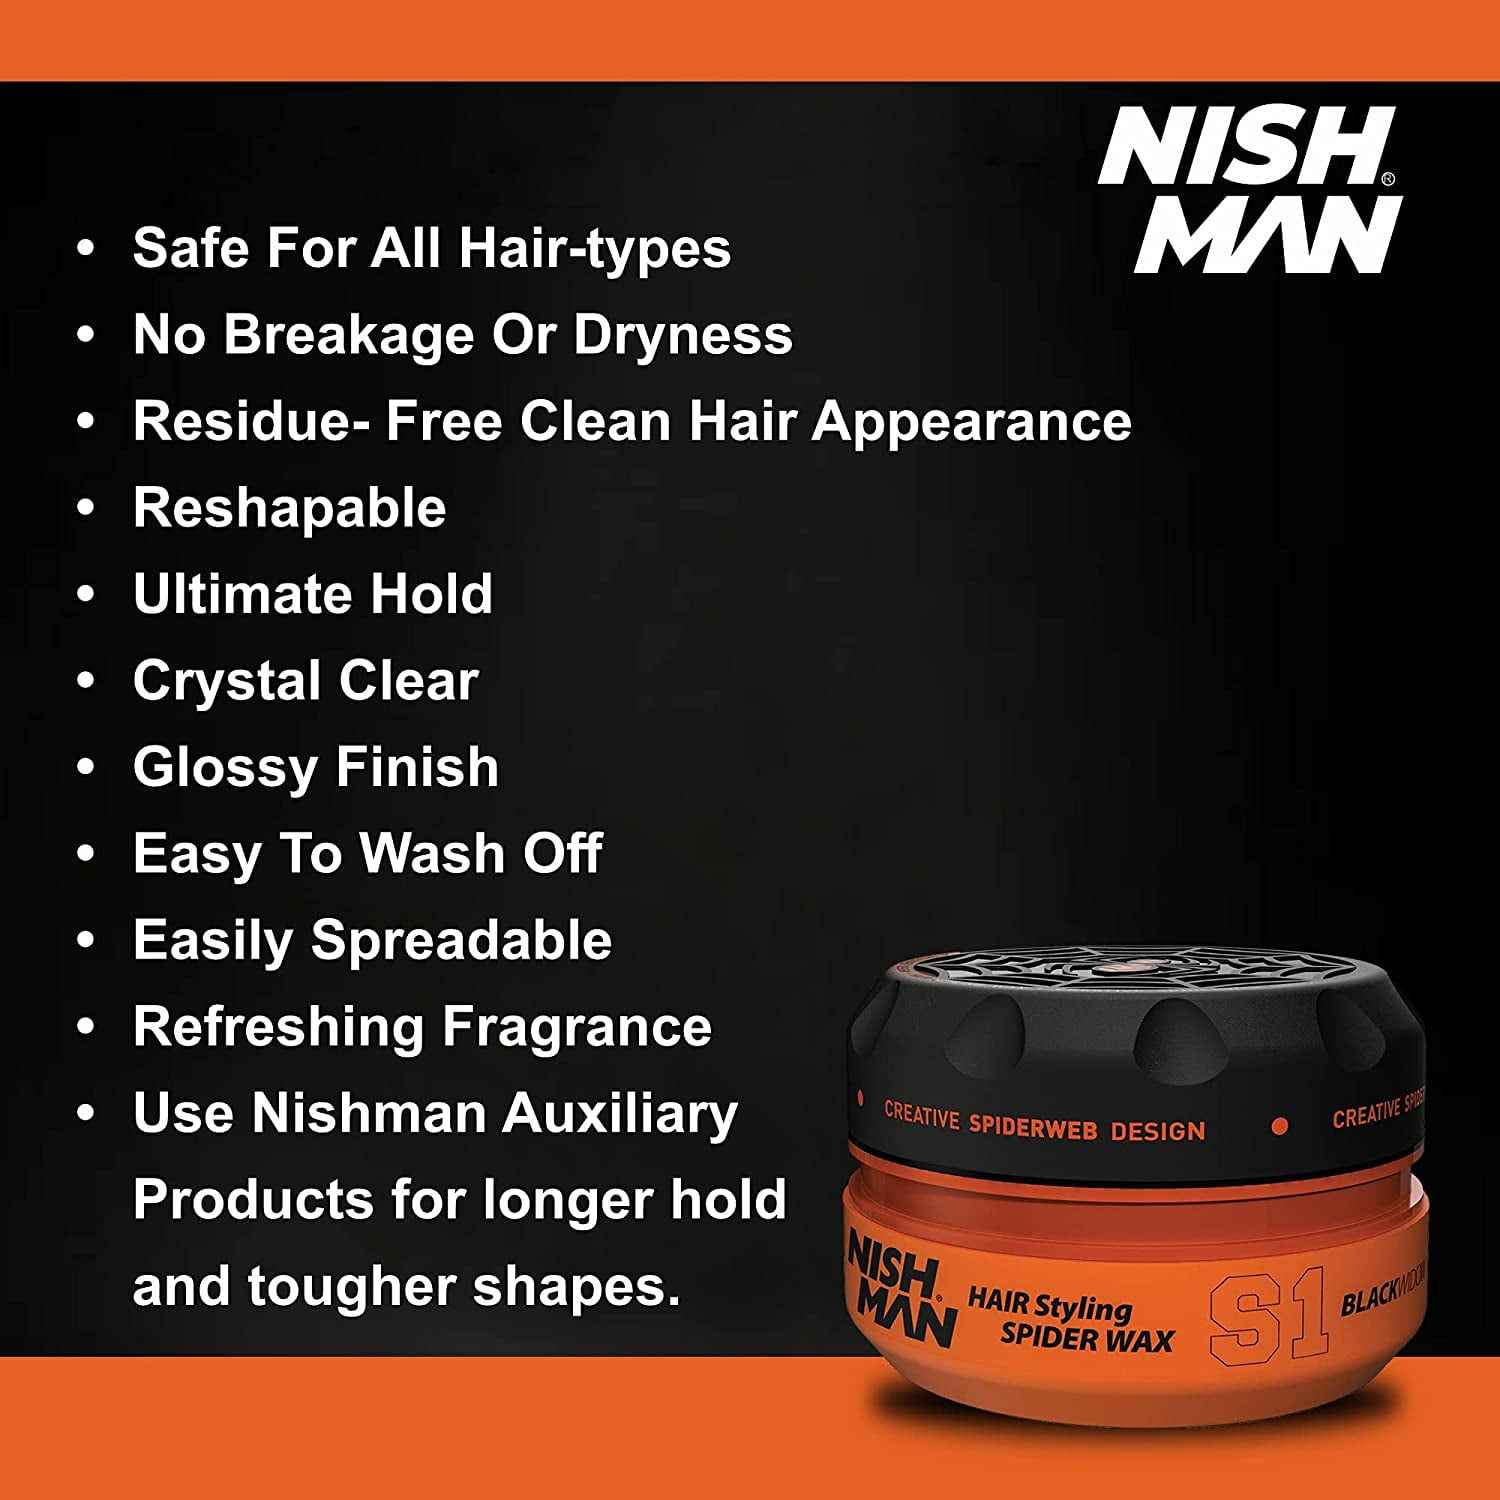 Source Wholesale Natural & Organic Water Soluble Nishman Hair Styling Spider  Wax S3 For Own Home Hair Styling on m.